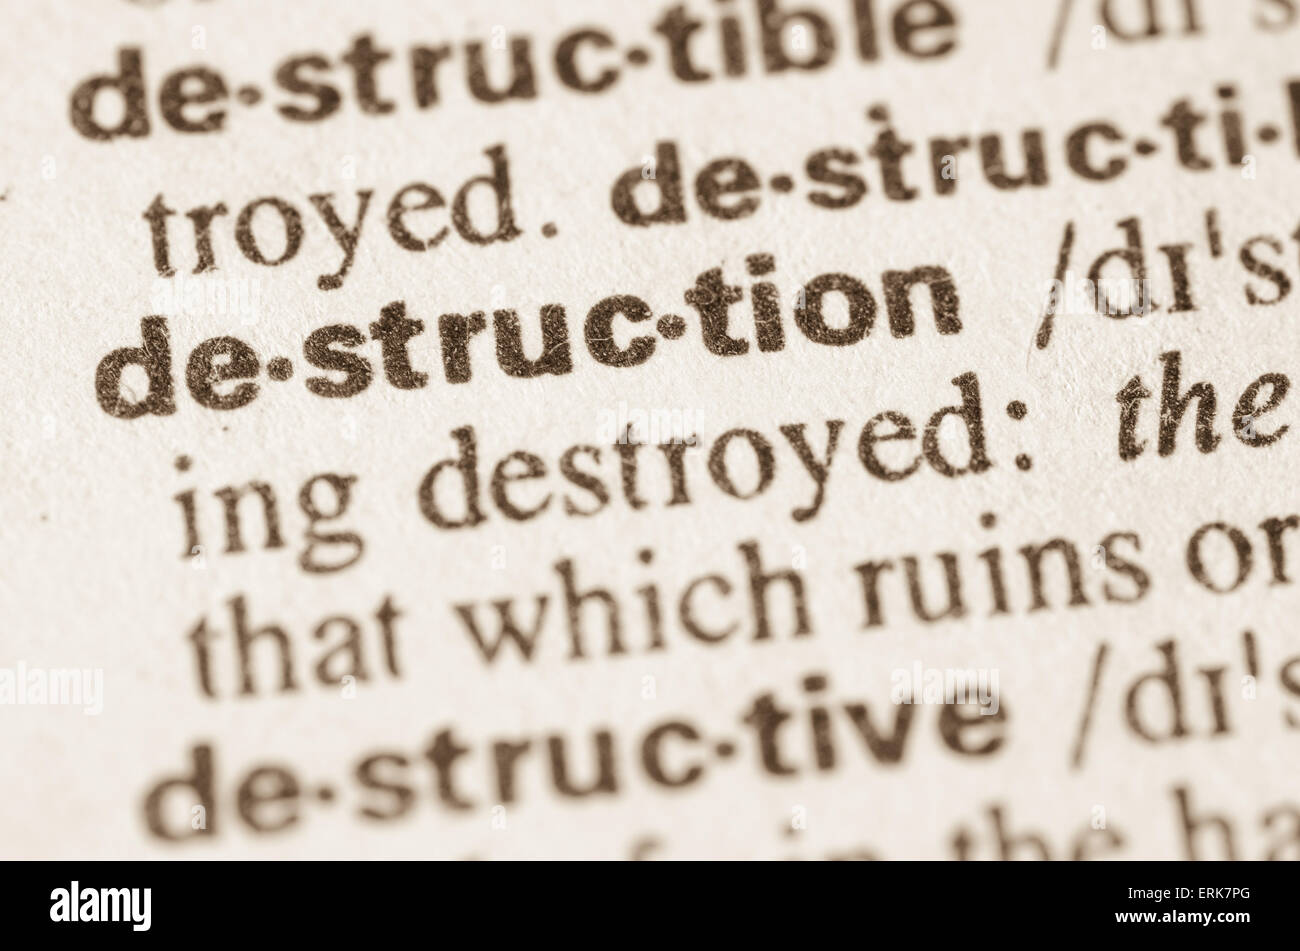 Definition of word destruction in dictionary Stock Photo